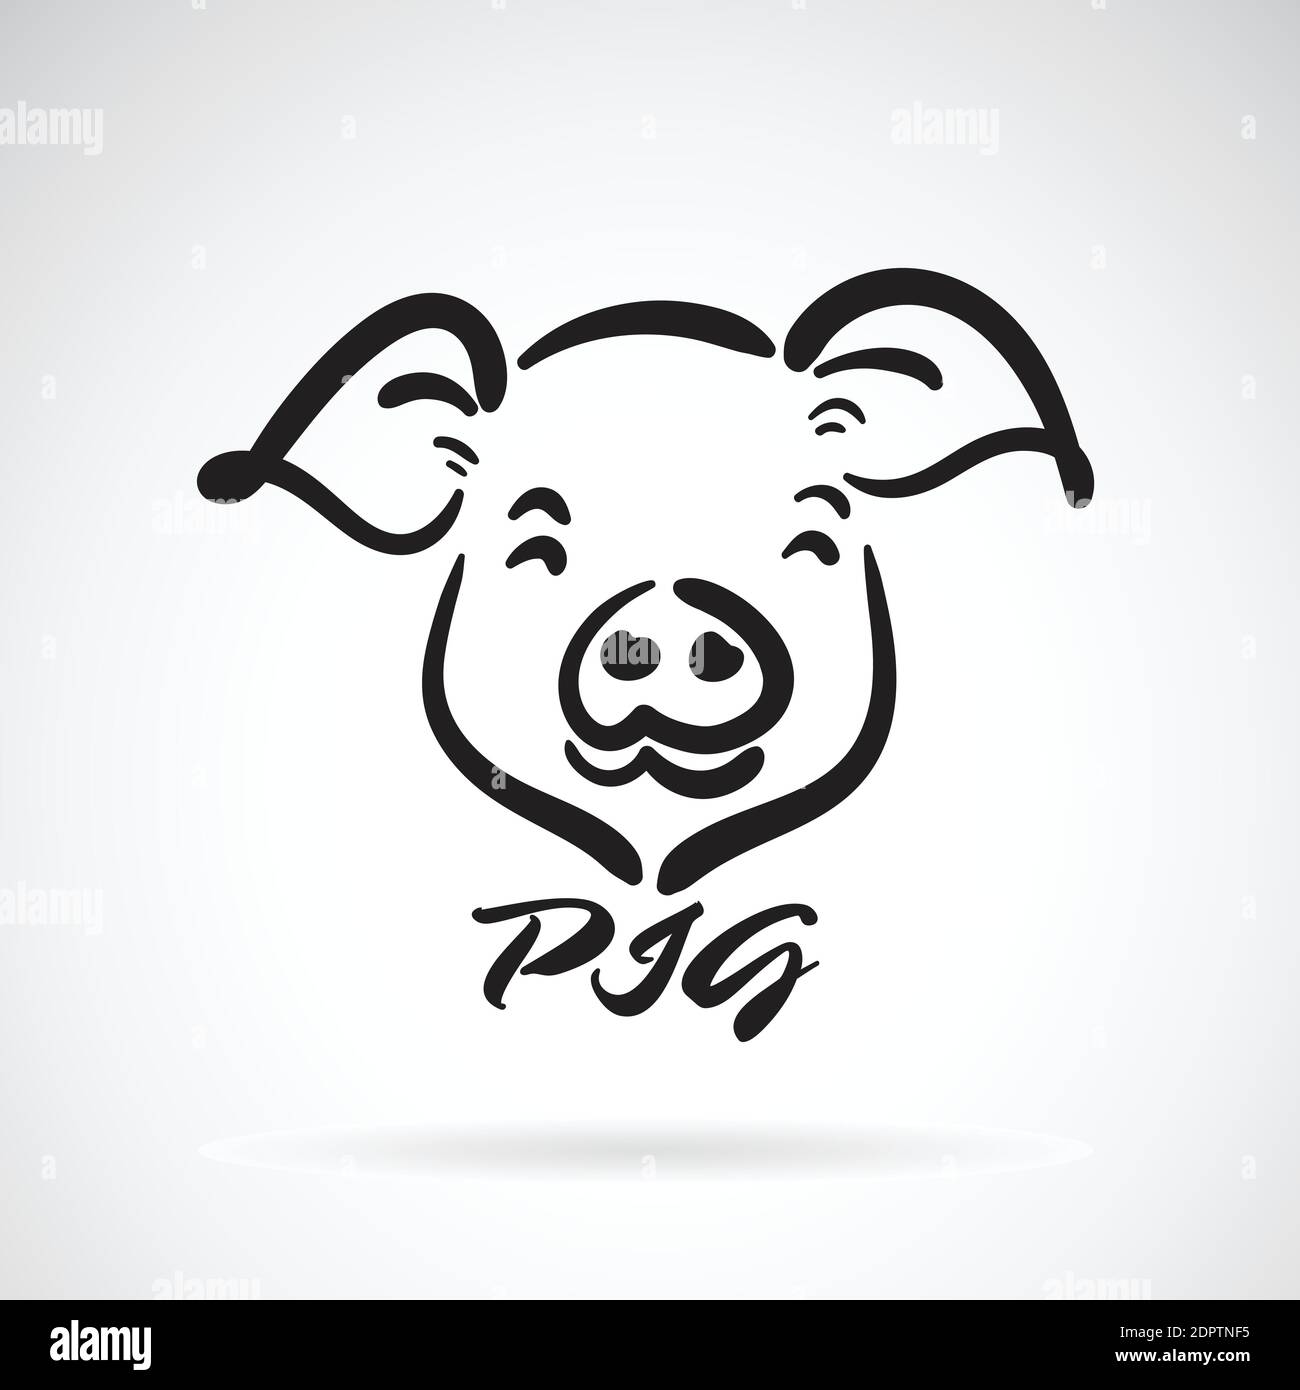 Vector of a pigs head design on a white background. Farm animals. Pig logo or icon. Easy editable layered vector illustration. Stock Vector